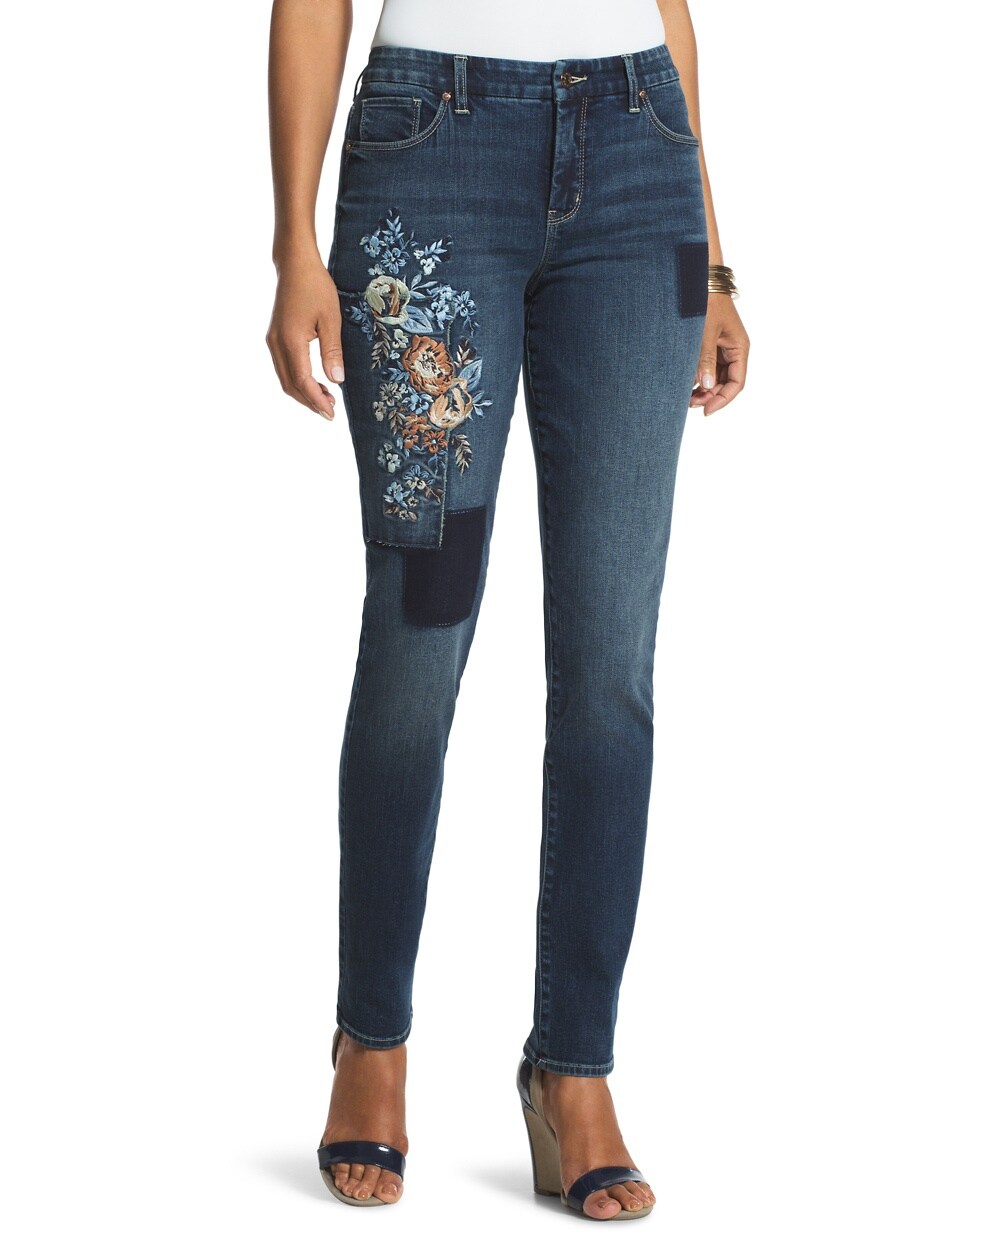 So Slimming Floral Patchwork Girlfriend Jeans - Chico's